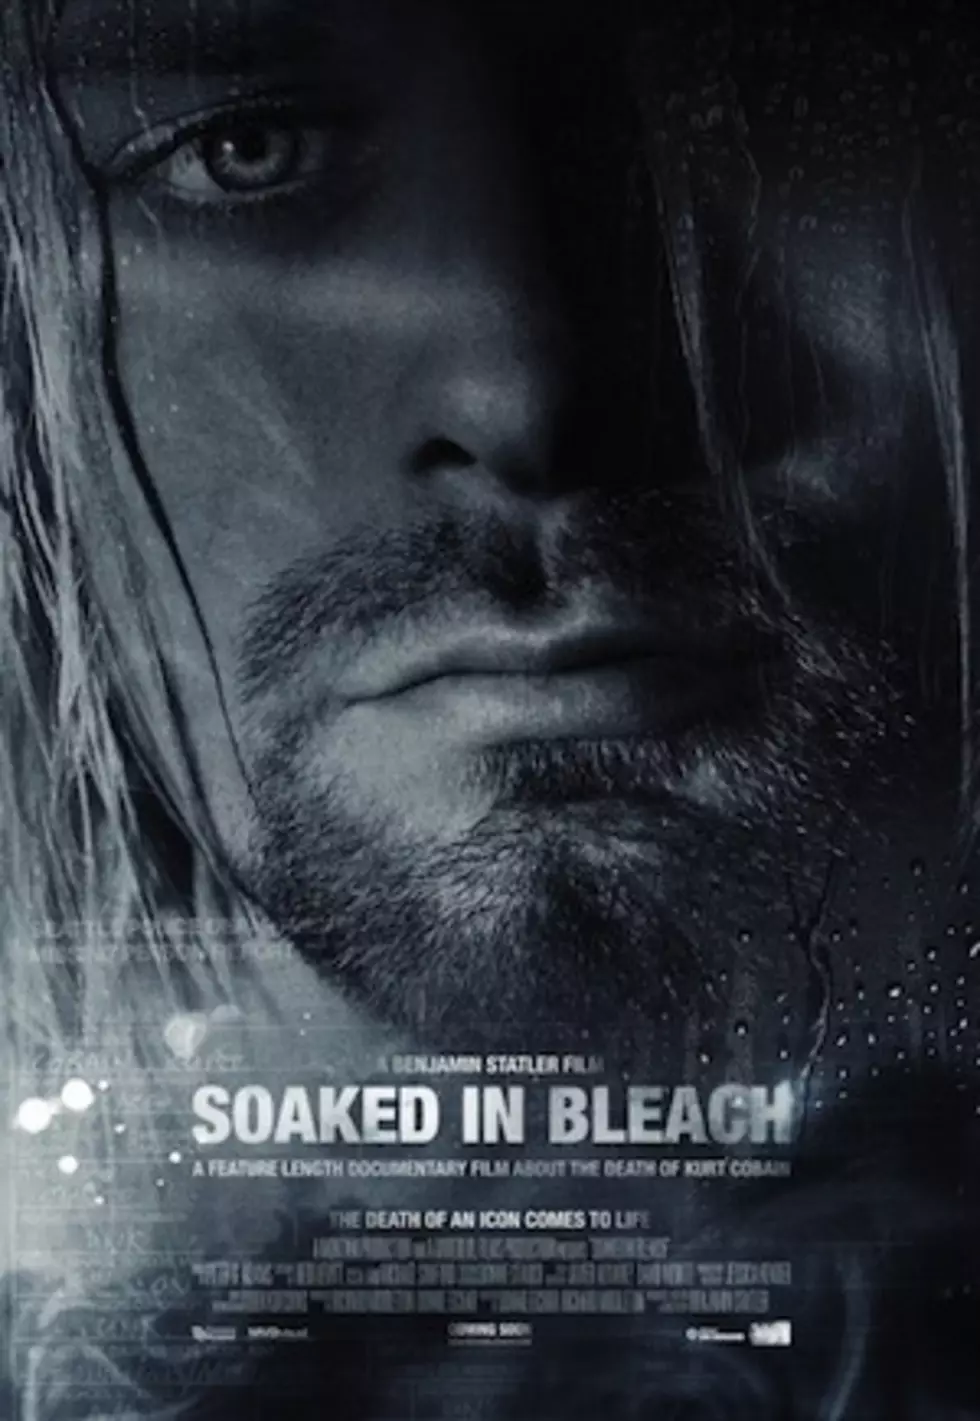 Courtney Love Attempts to Stop Screenings of Kurt Cobain Murder Docudrama &#8216;Soaked in Bleach&#8217;